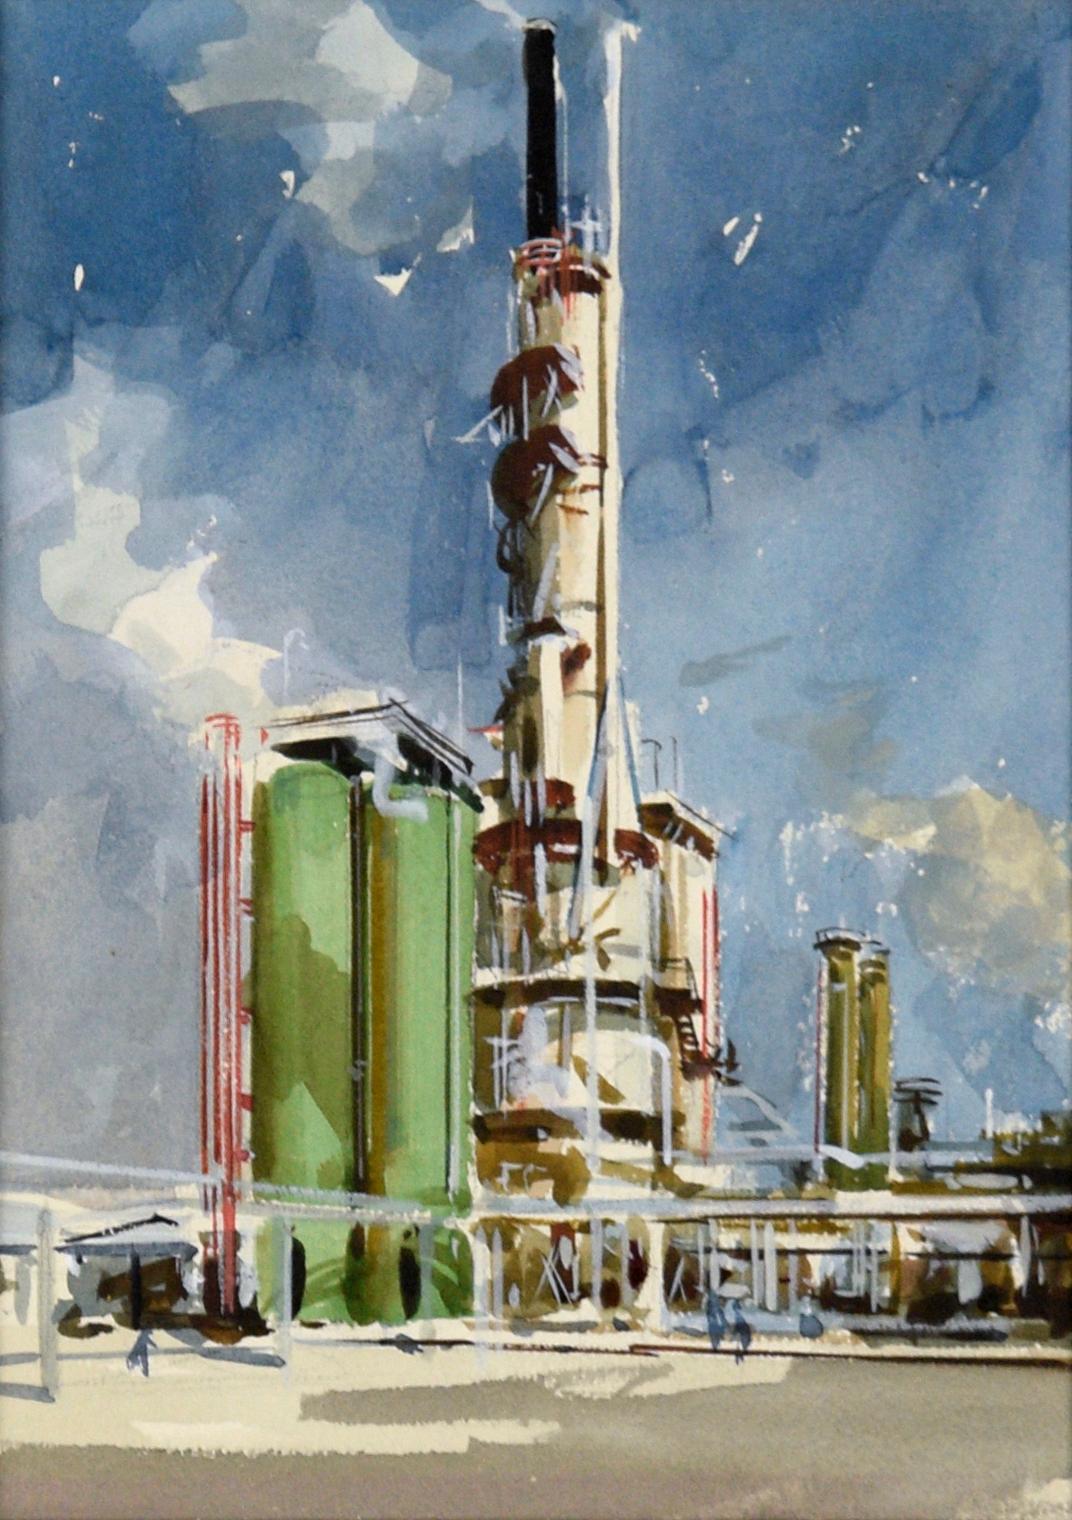 Smokestack at the Refinery - Realistic Industrial Illustration in Gouache - Painting by Charles Kinghan